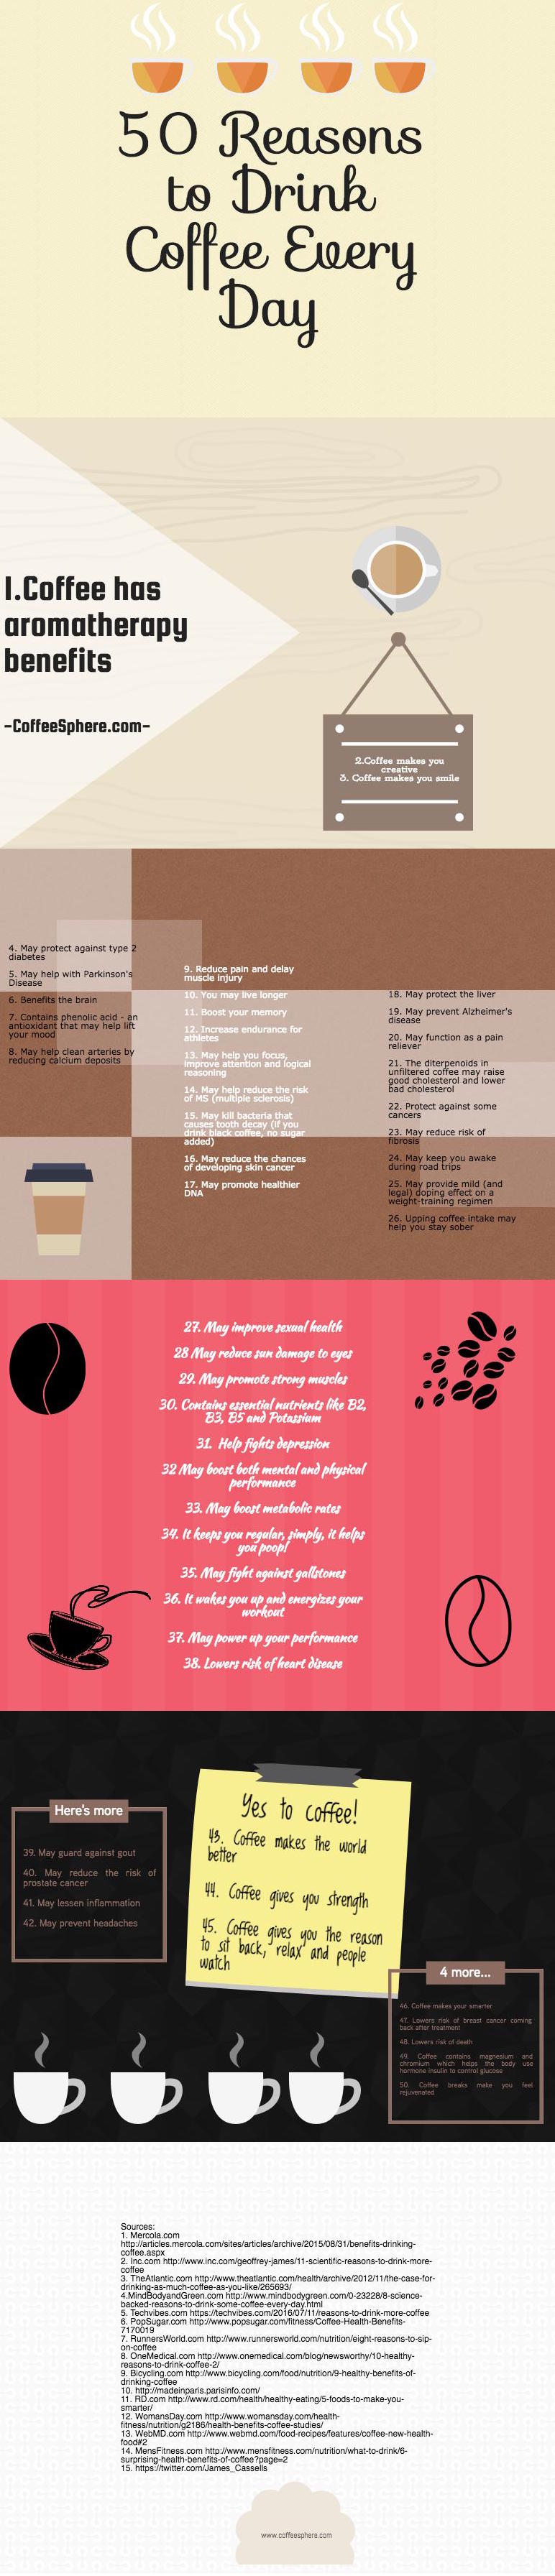 50 reasons to drink coffee